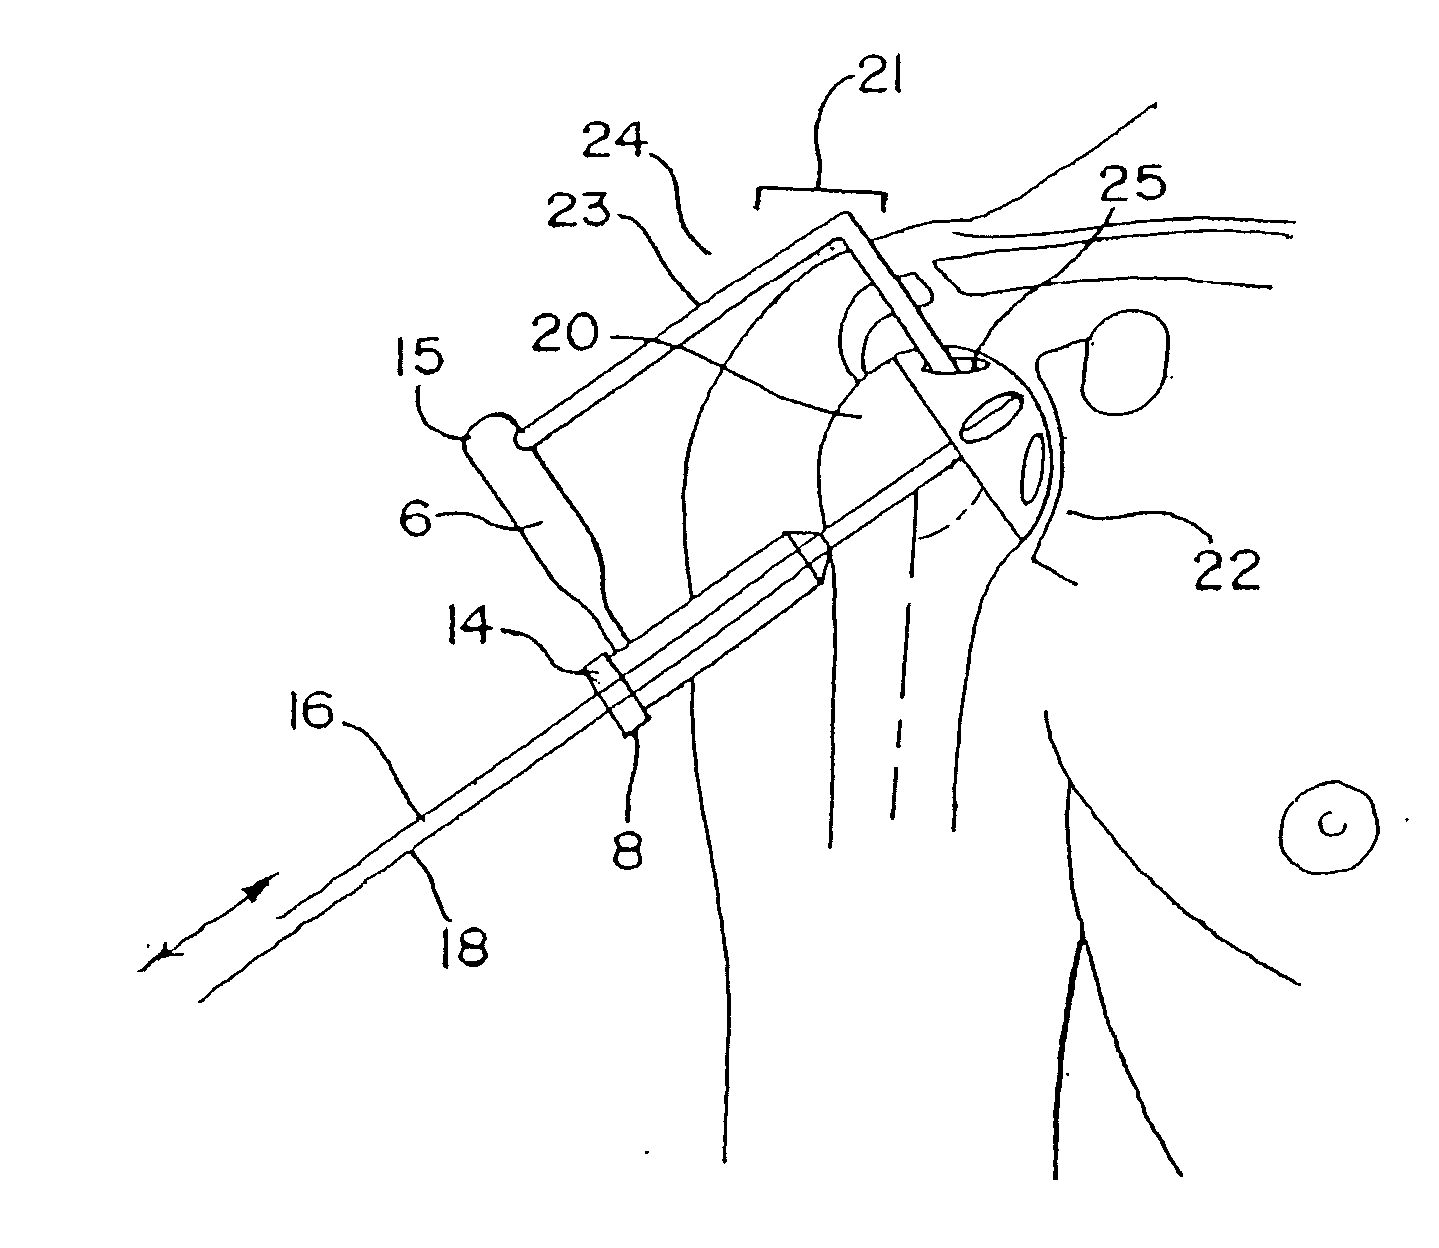 Method of minimally invasive shoulder replacement surgery